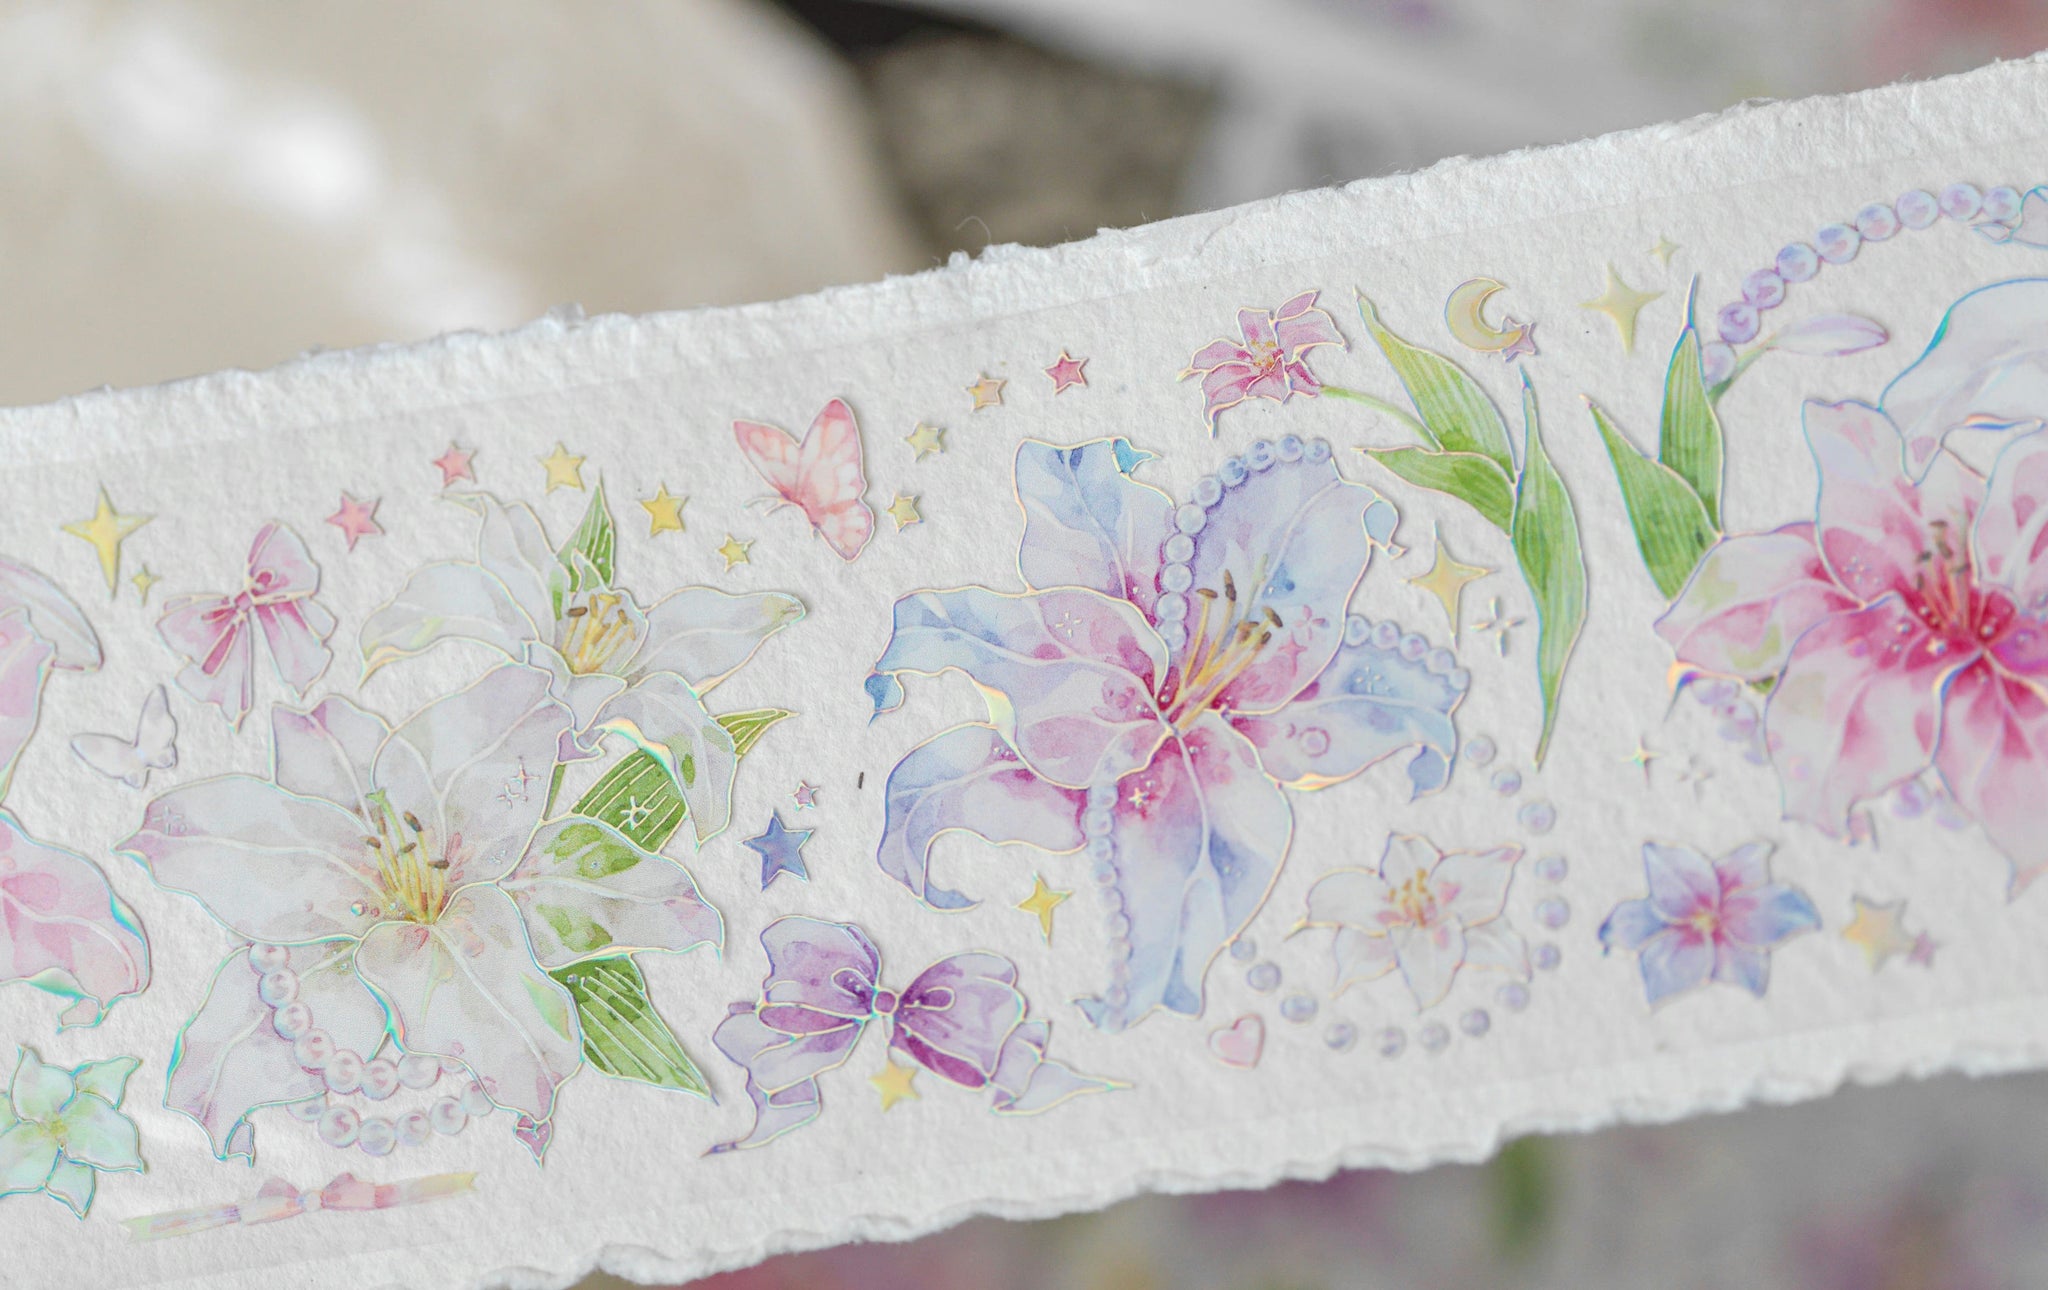 Benchu Studio Masking Tape: Lily and Pearls